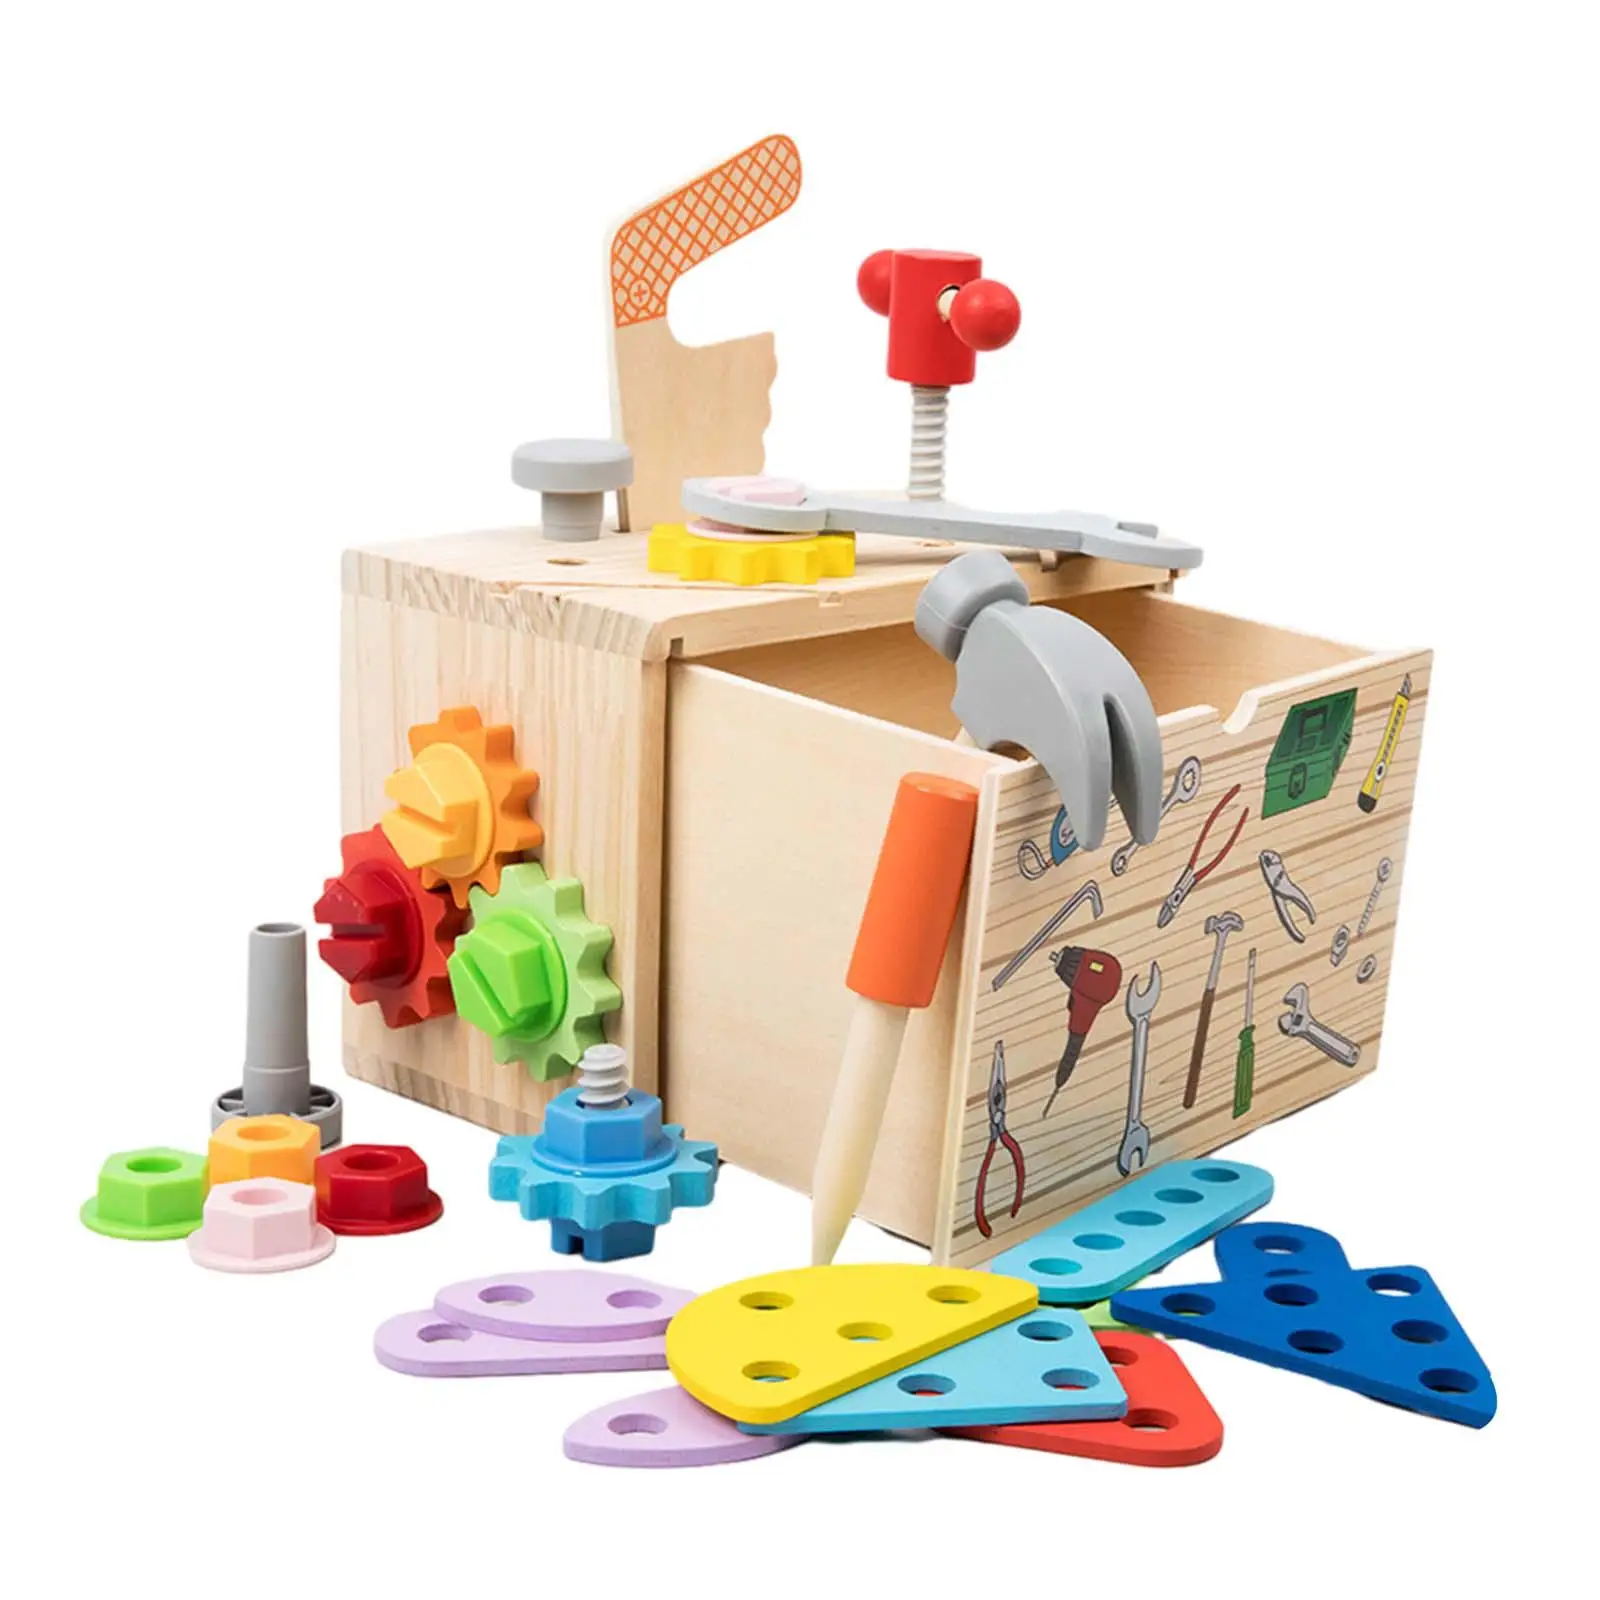 Wooden Toolbox Toys Kids Play Tool Set for Birthday Holiday 2 3 4 5 Years Old